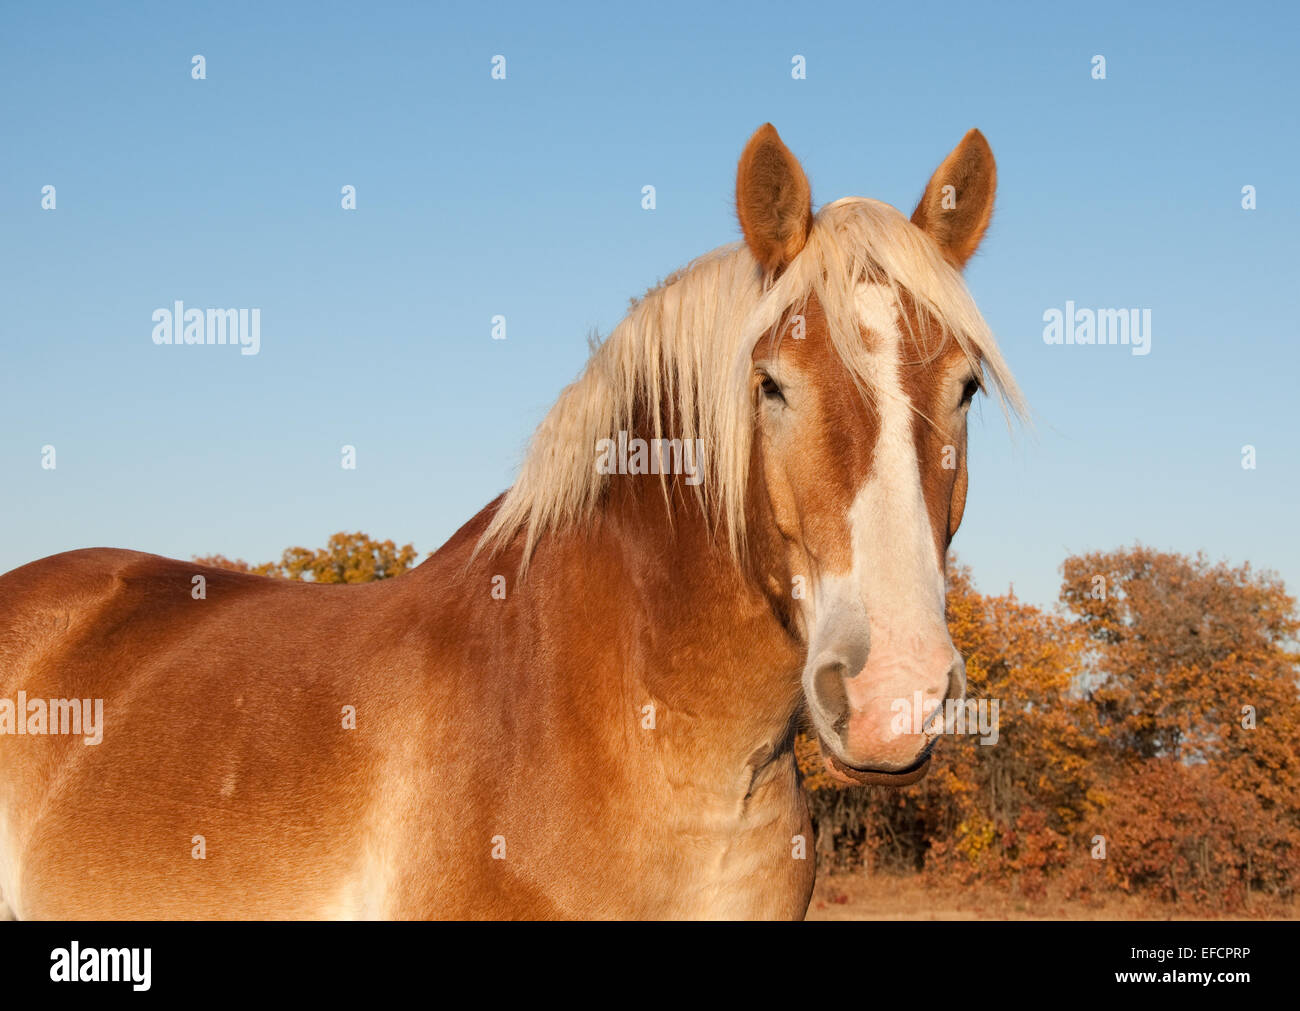 Belgian Draft horse against fall colored trees and clear blue sky Stock Photo